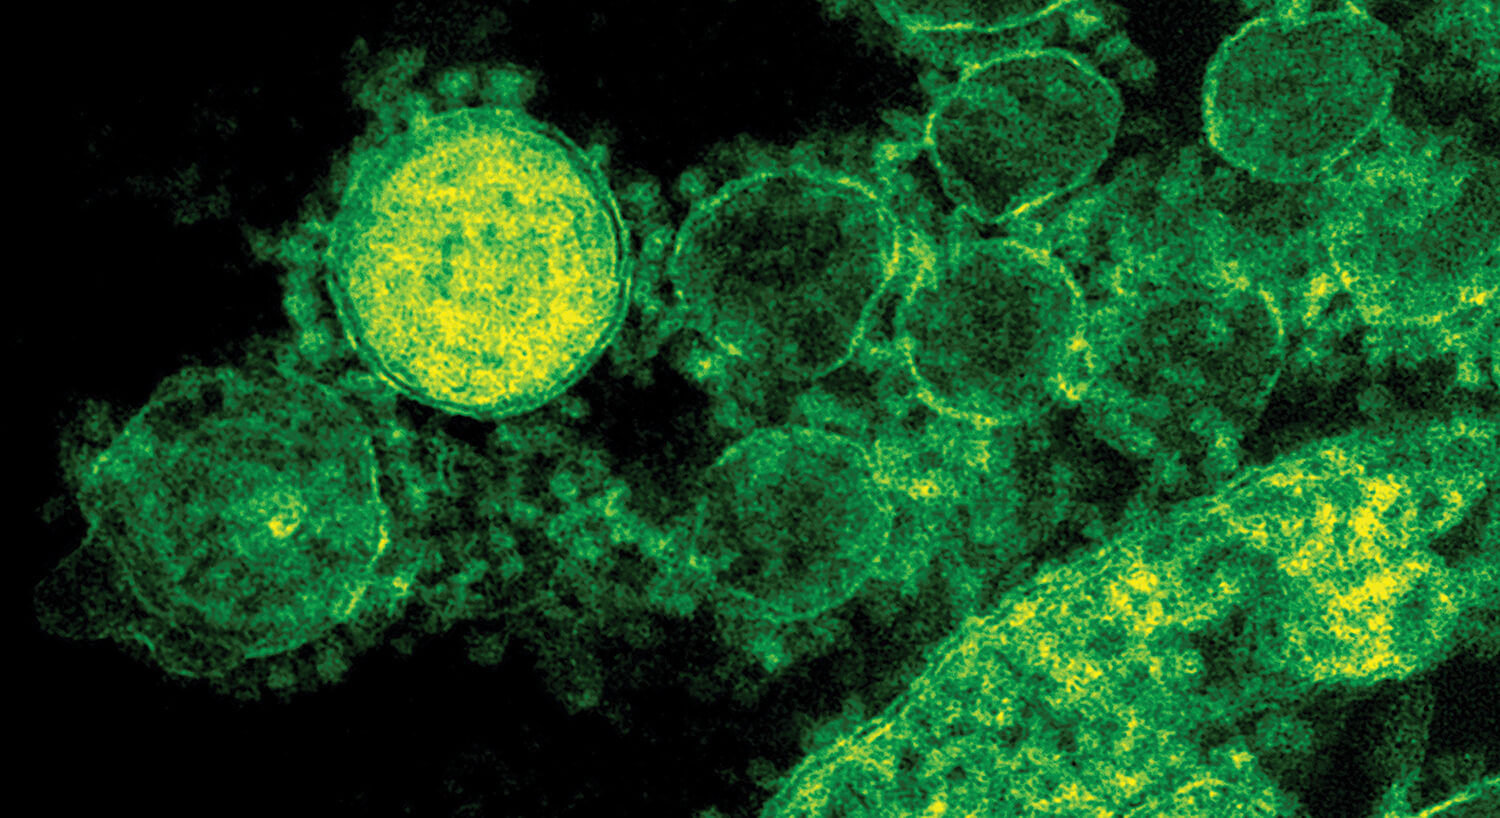 Detail from a MERS (Middle East Respiratory Syndrome) virus.